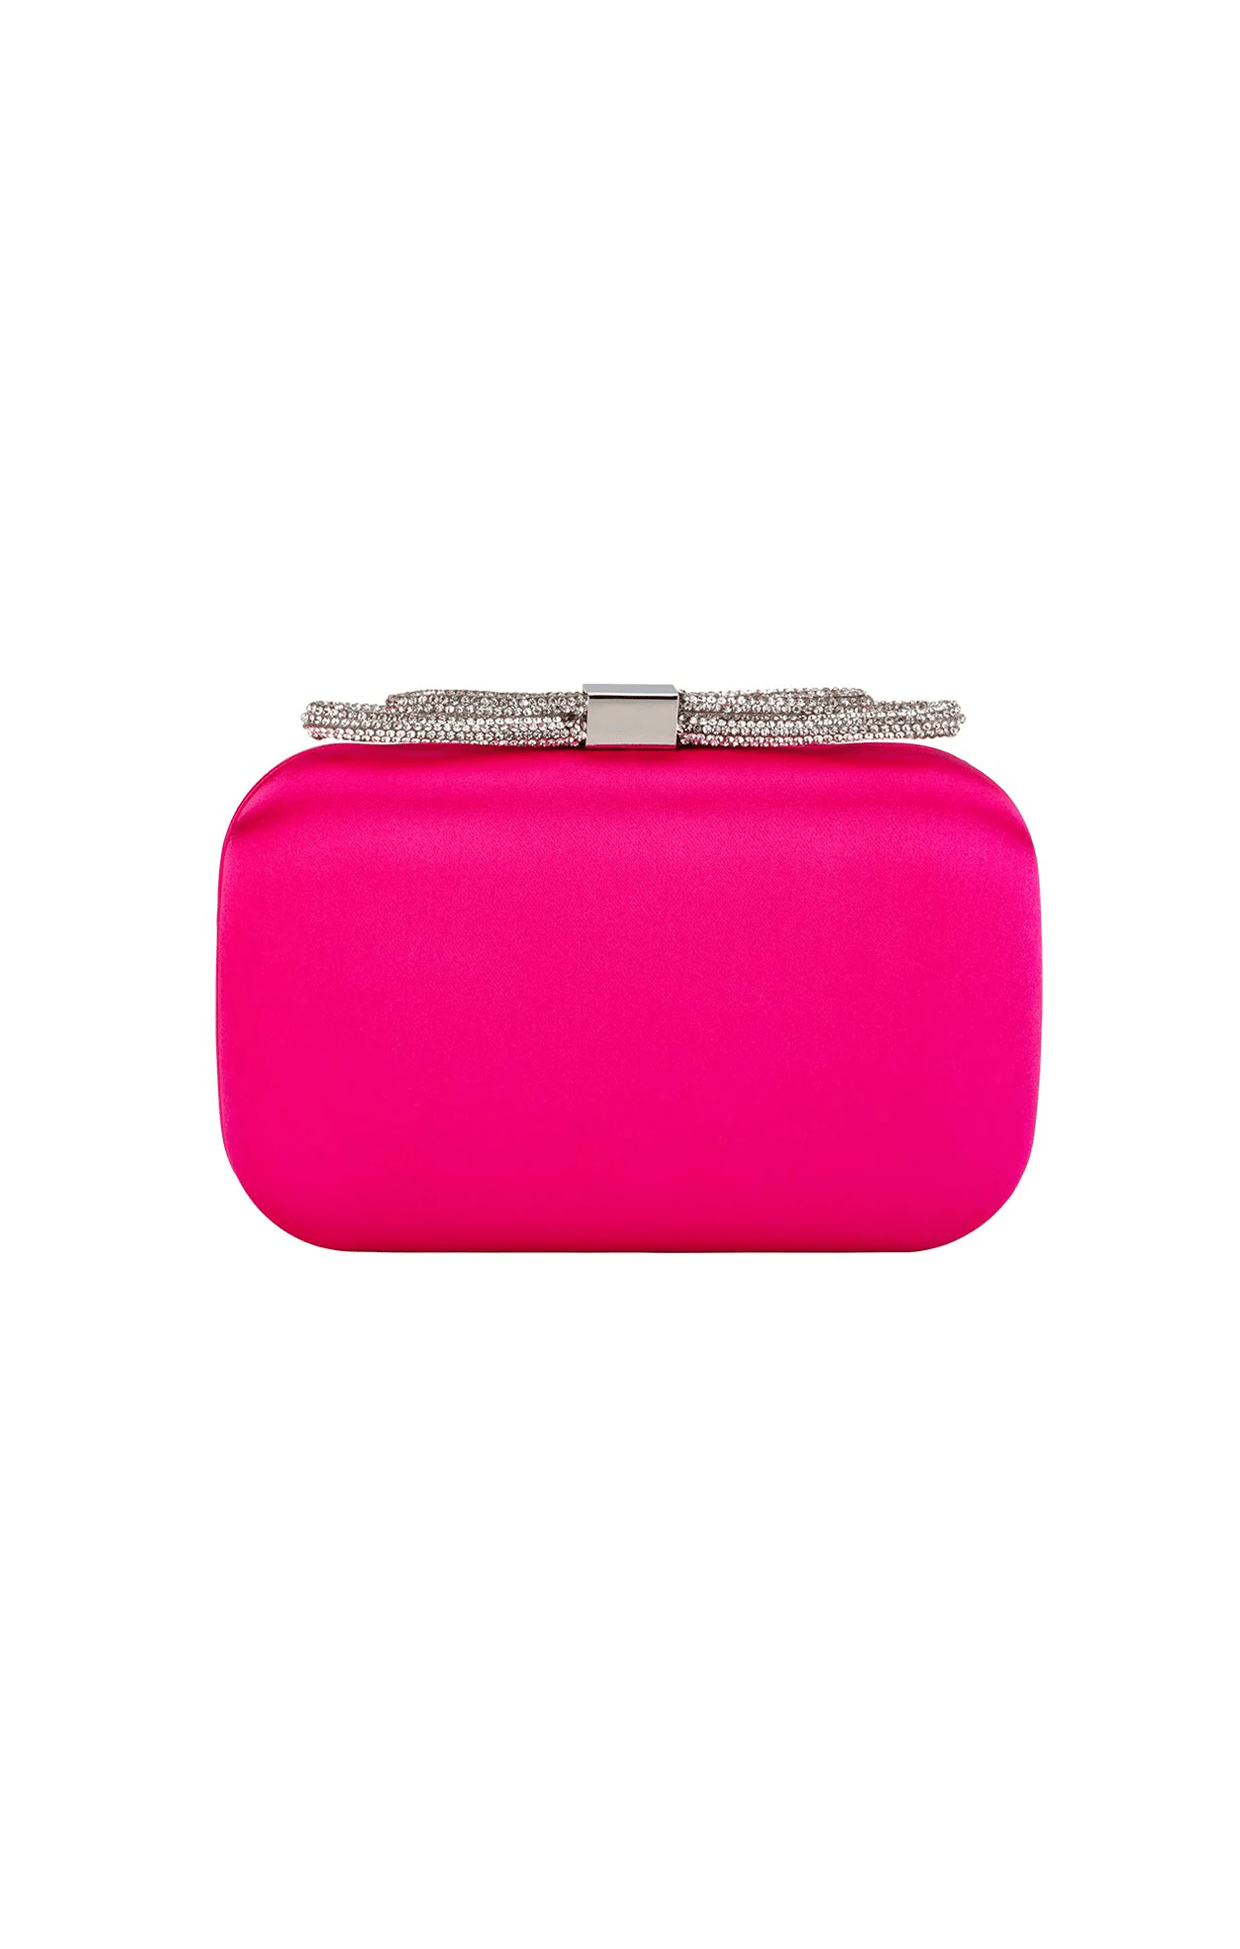 ACCESSORIES Bags Clutches One Size / Pink ADA CRYSTAL BOW CLUTCH IN FUCHSIA